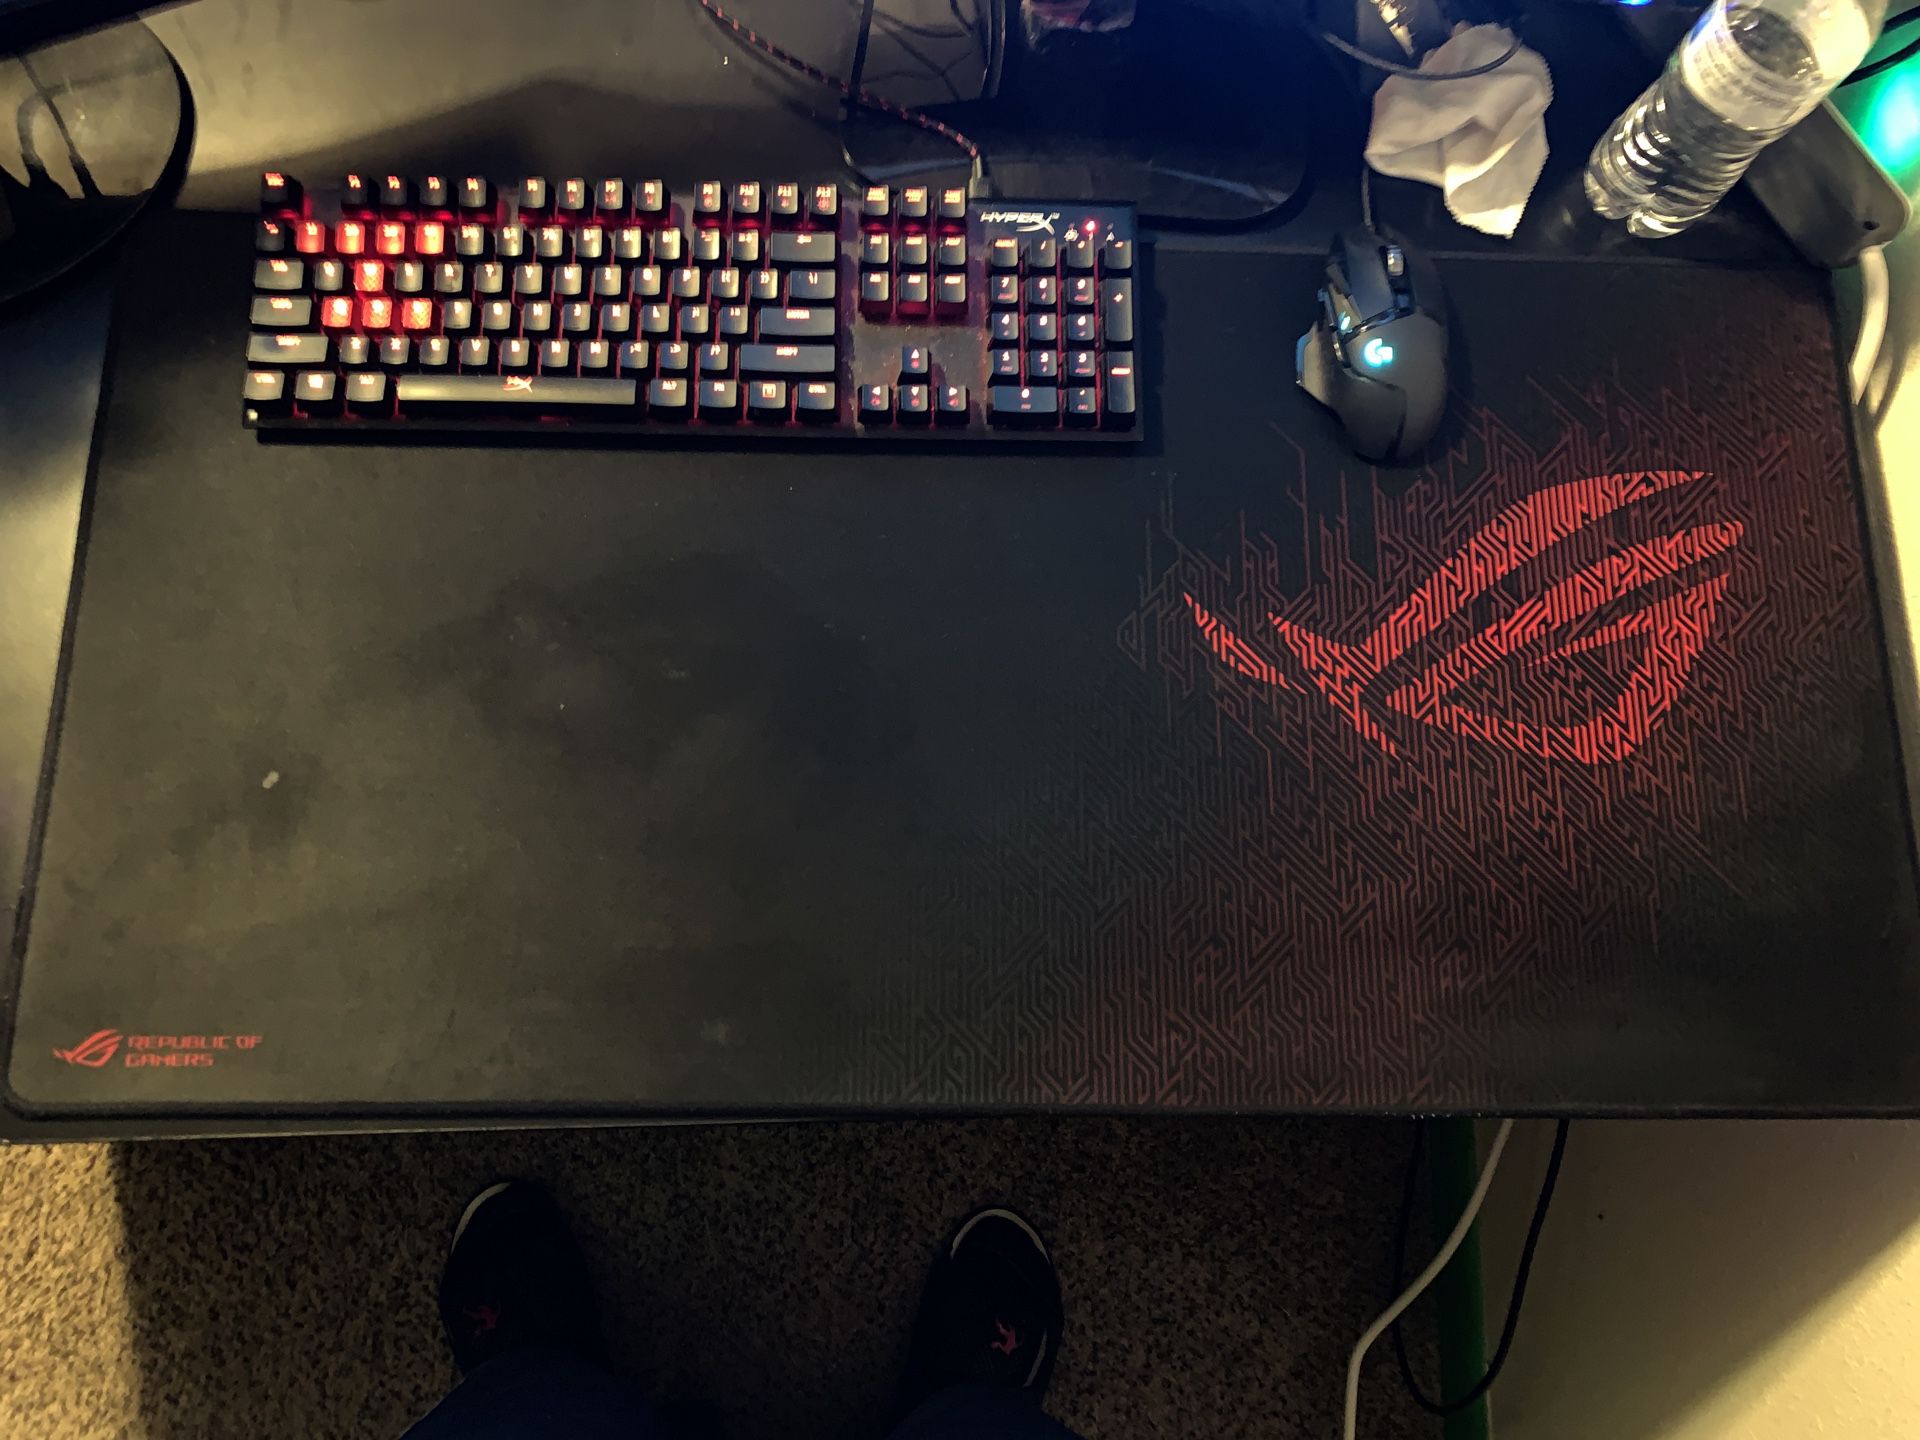 Asus Rog Sheath Gaming Mouse Pad For Sale In Lakewood Co Offerup